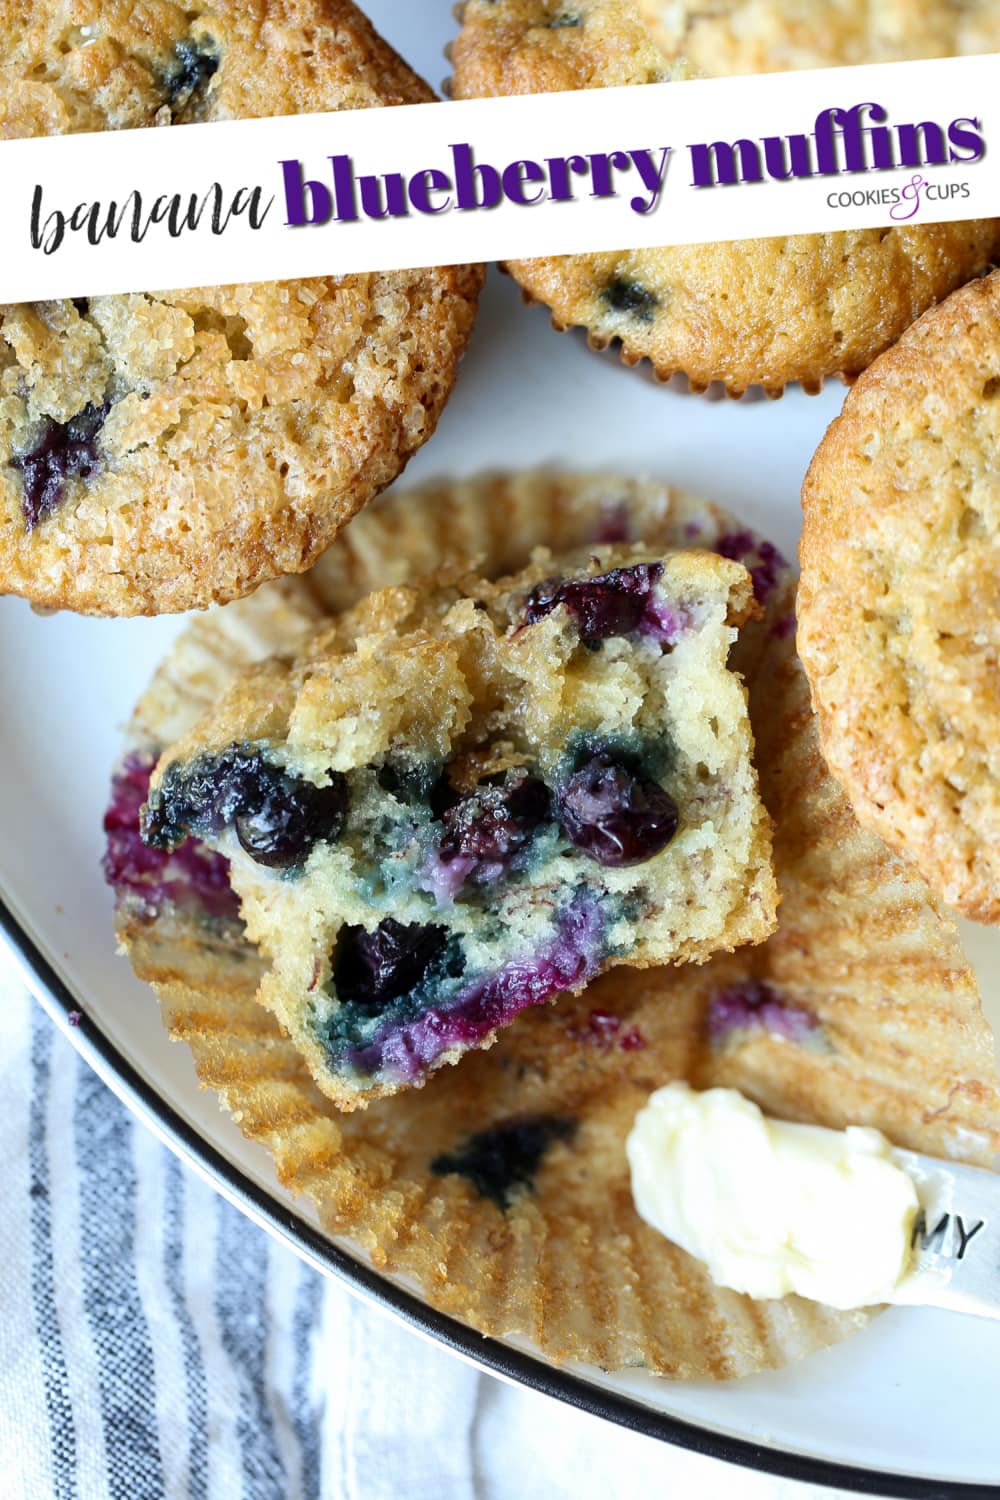 Pinterest image of a banana blueberry muffin.